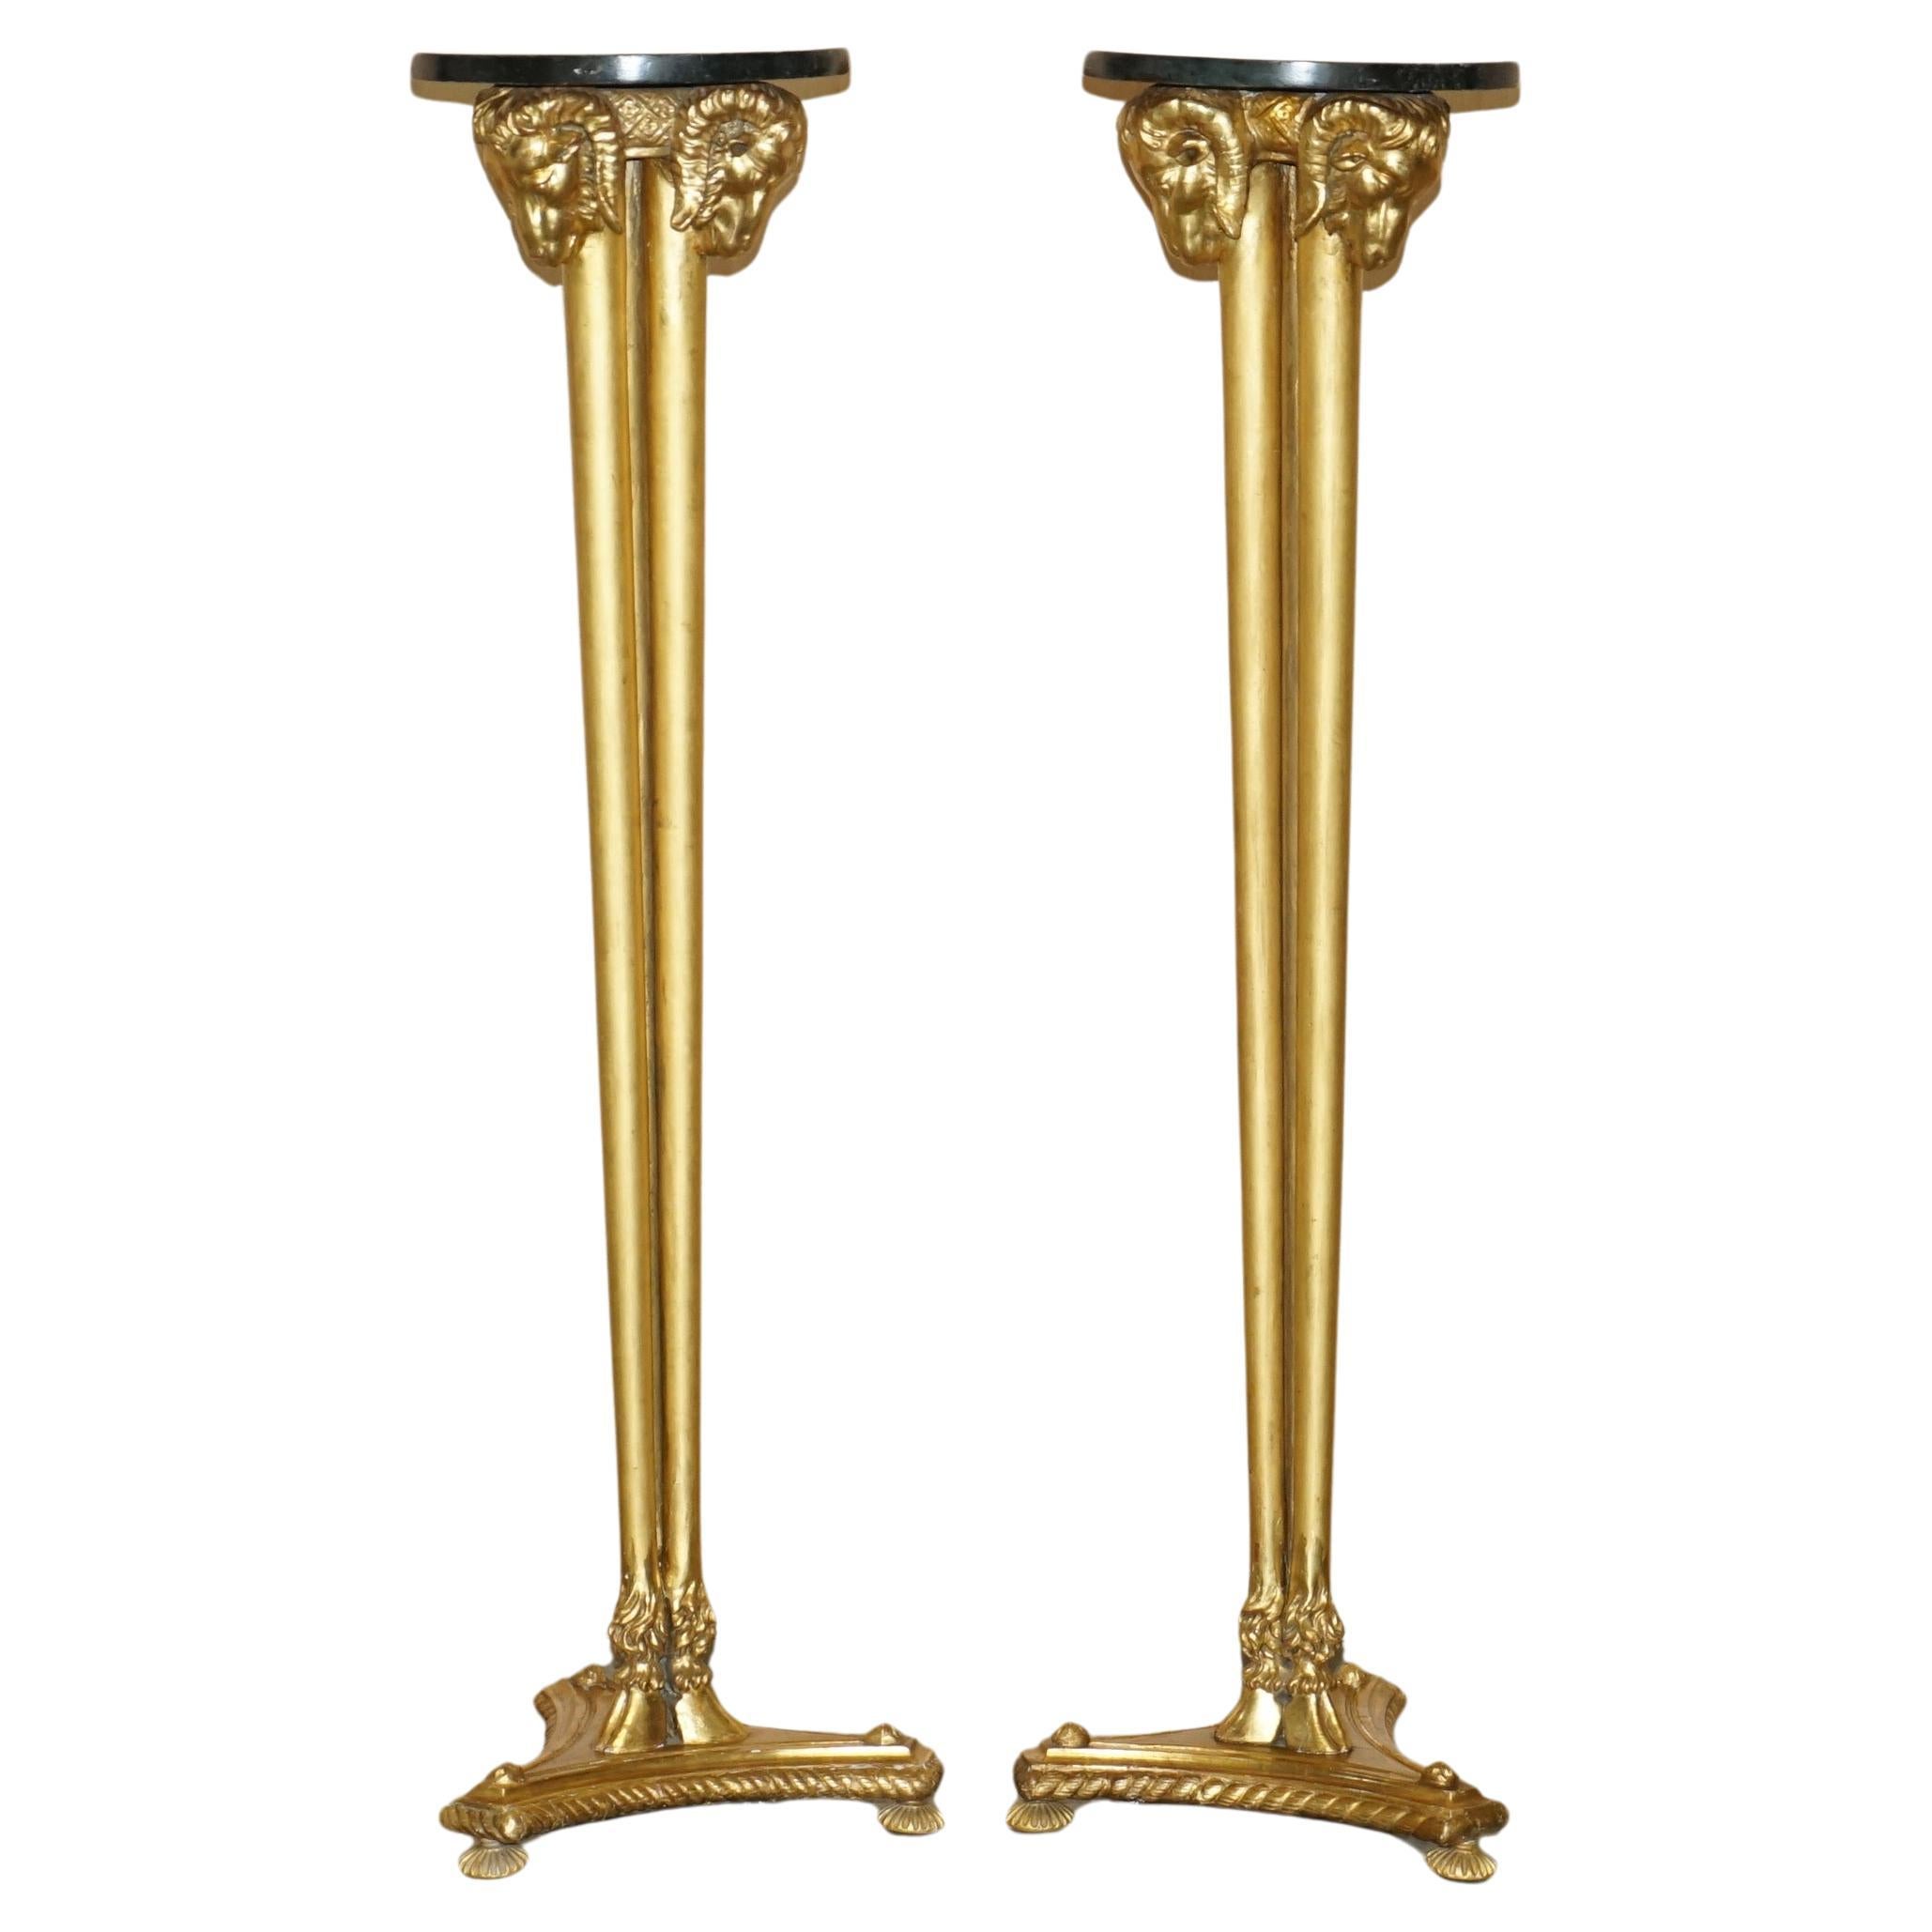 PAIR OF VINTAGE GOLD GILT RAMS HEAD & HOOF TALL TORCHIERE JARDINIERE STANDs